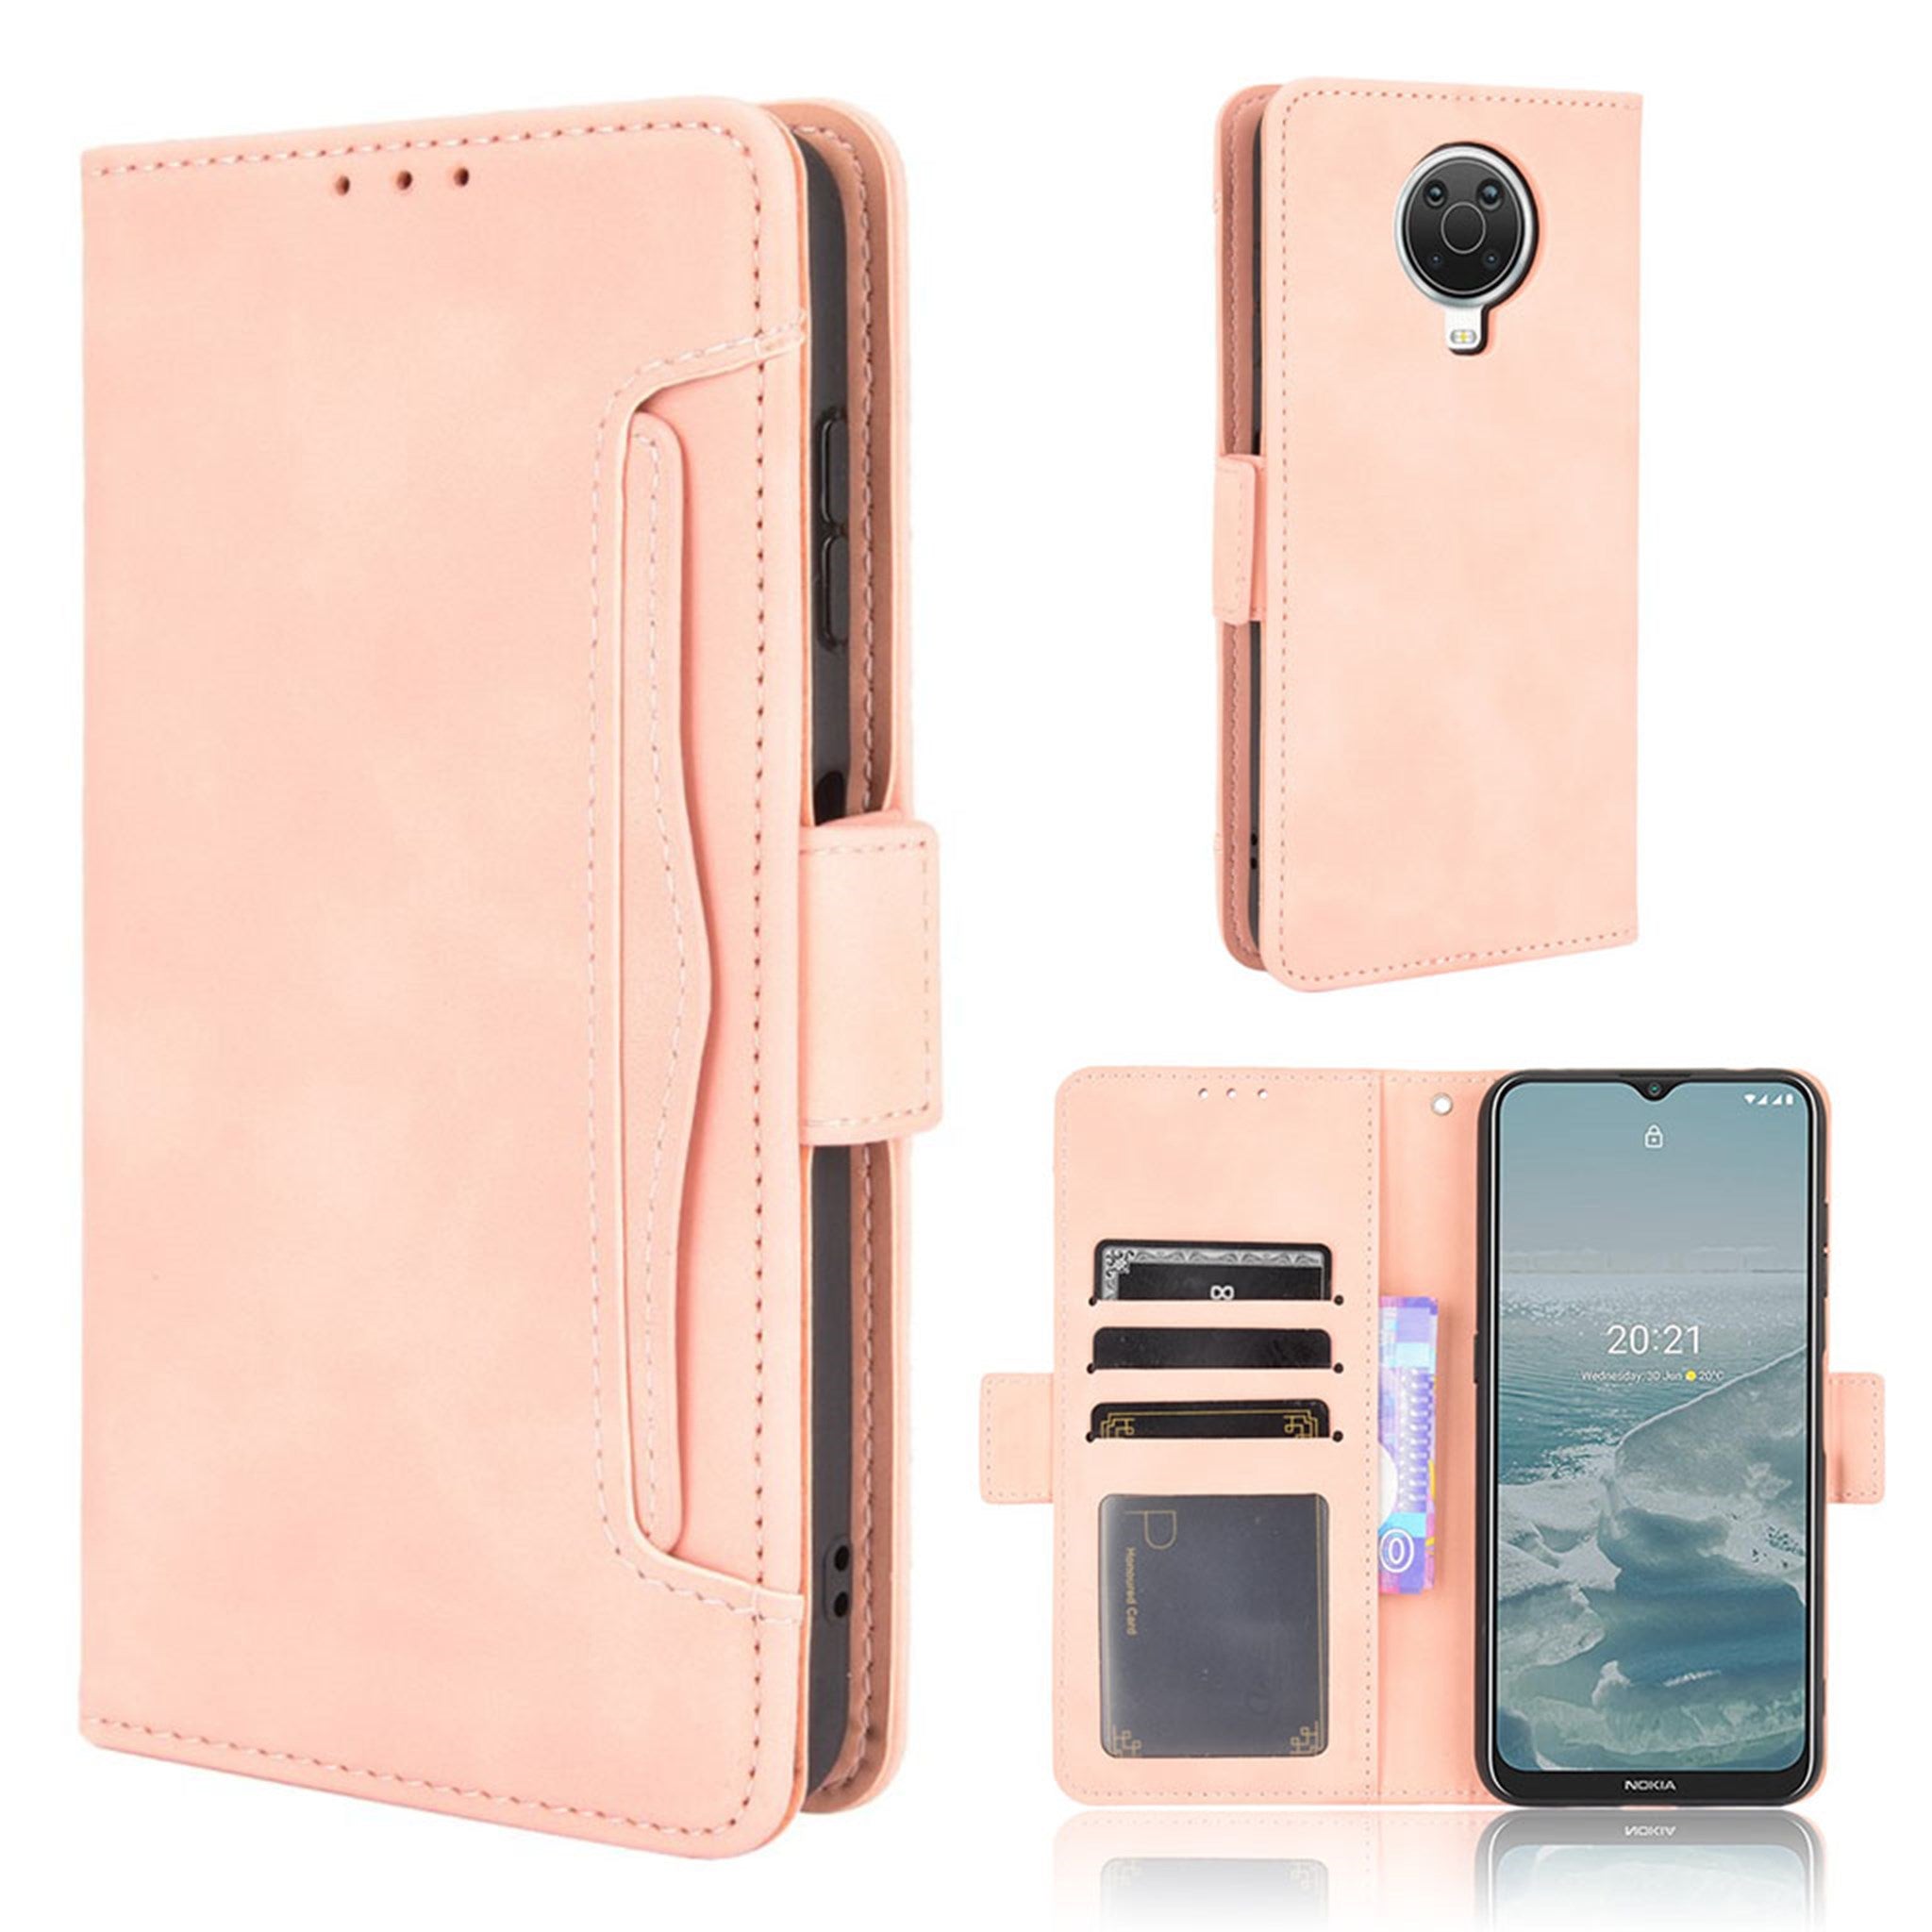 Modern-styled leather wallet case for Nokia G20 - Pink